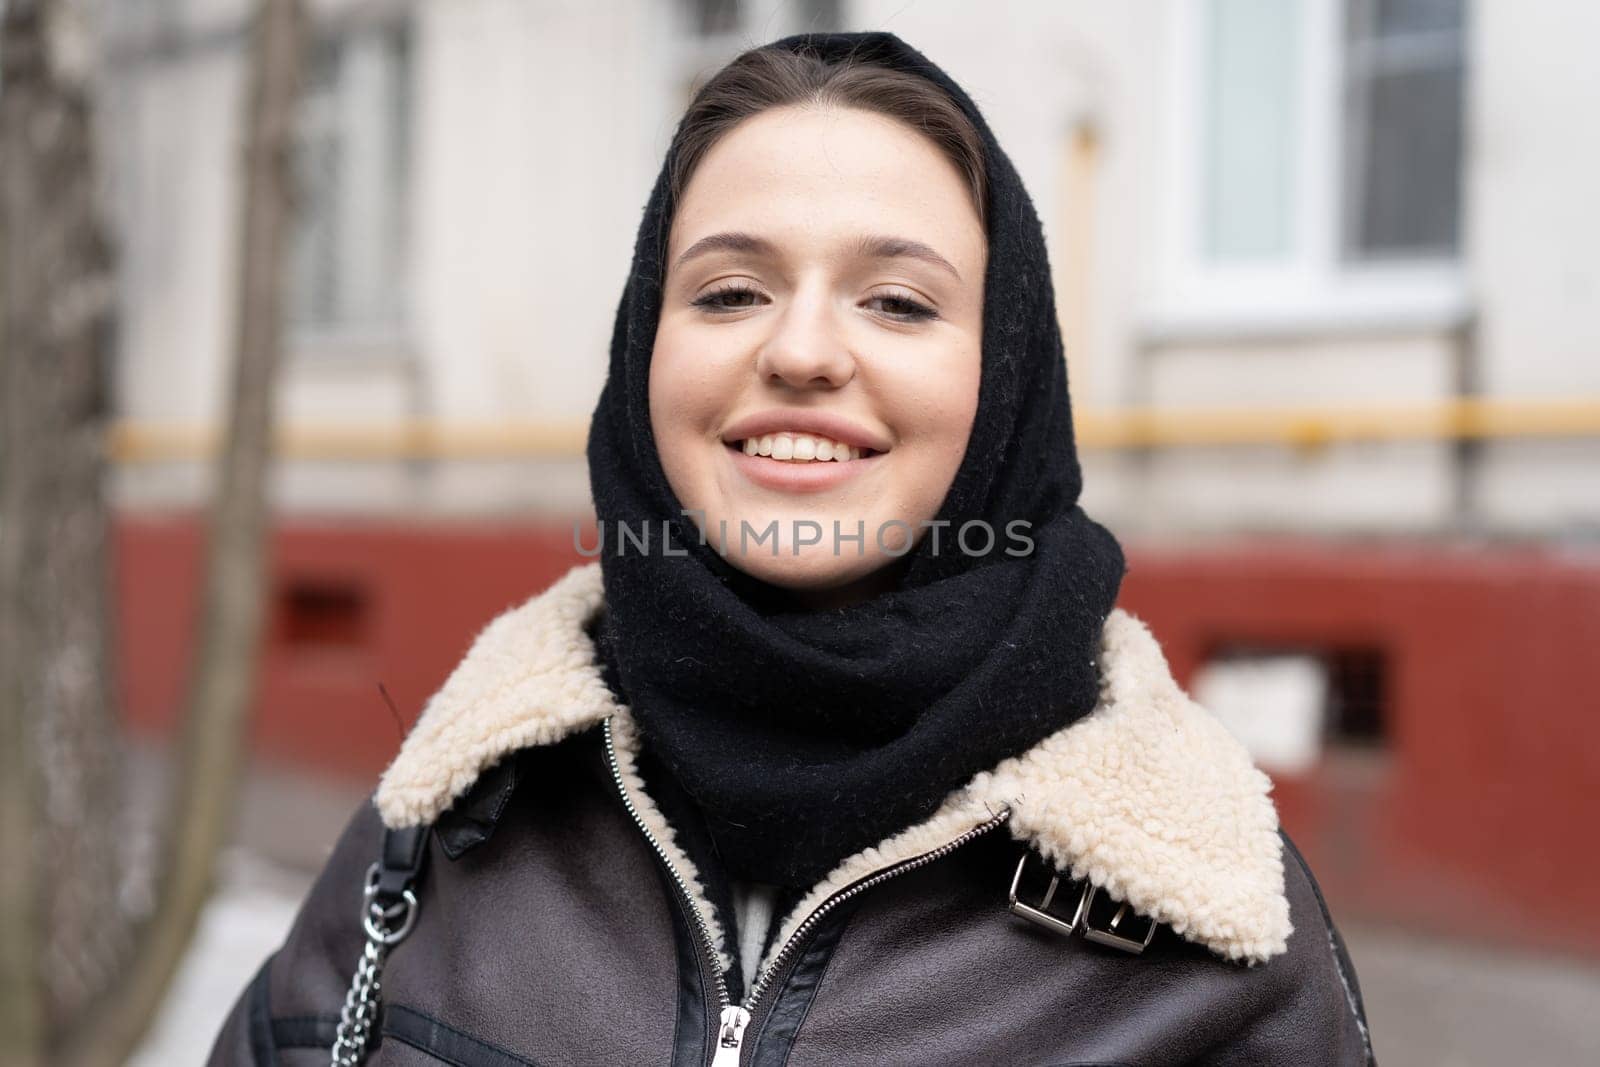 portrait of a young beautiful woman outside wearing a headscarf